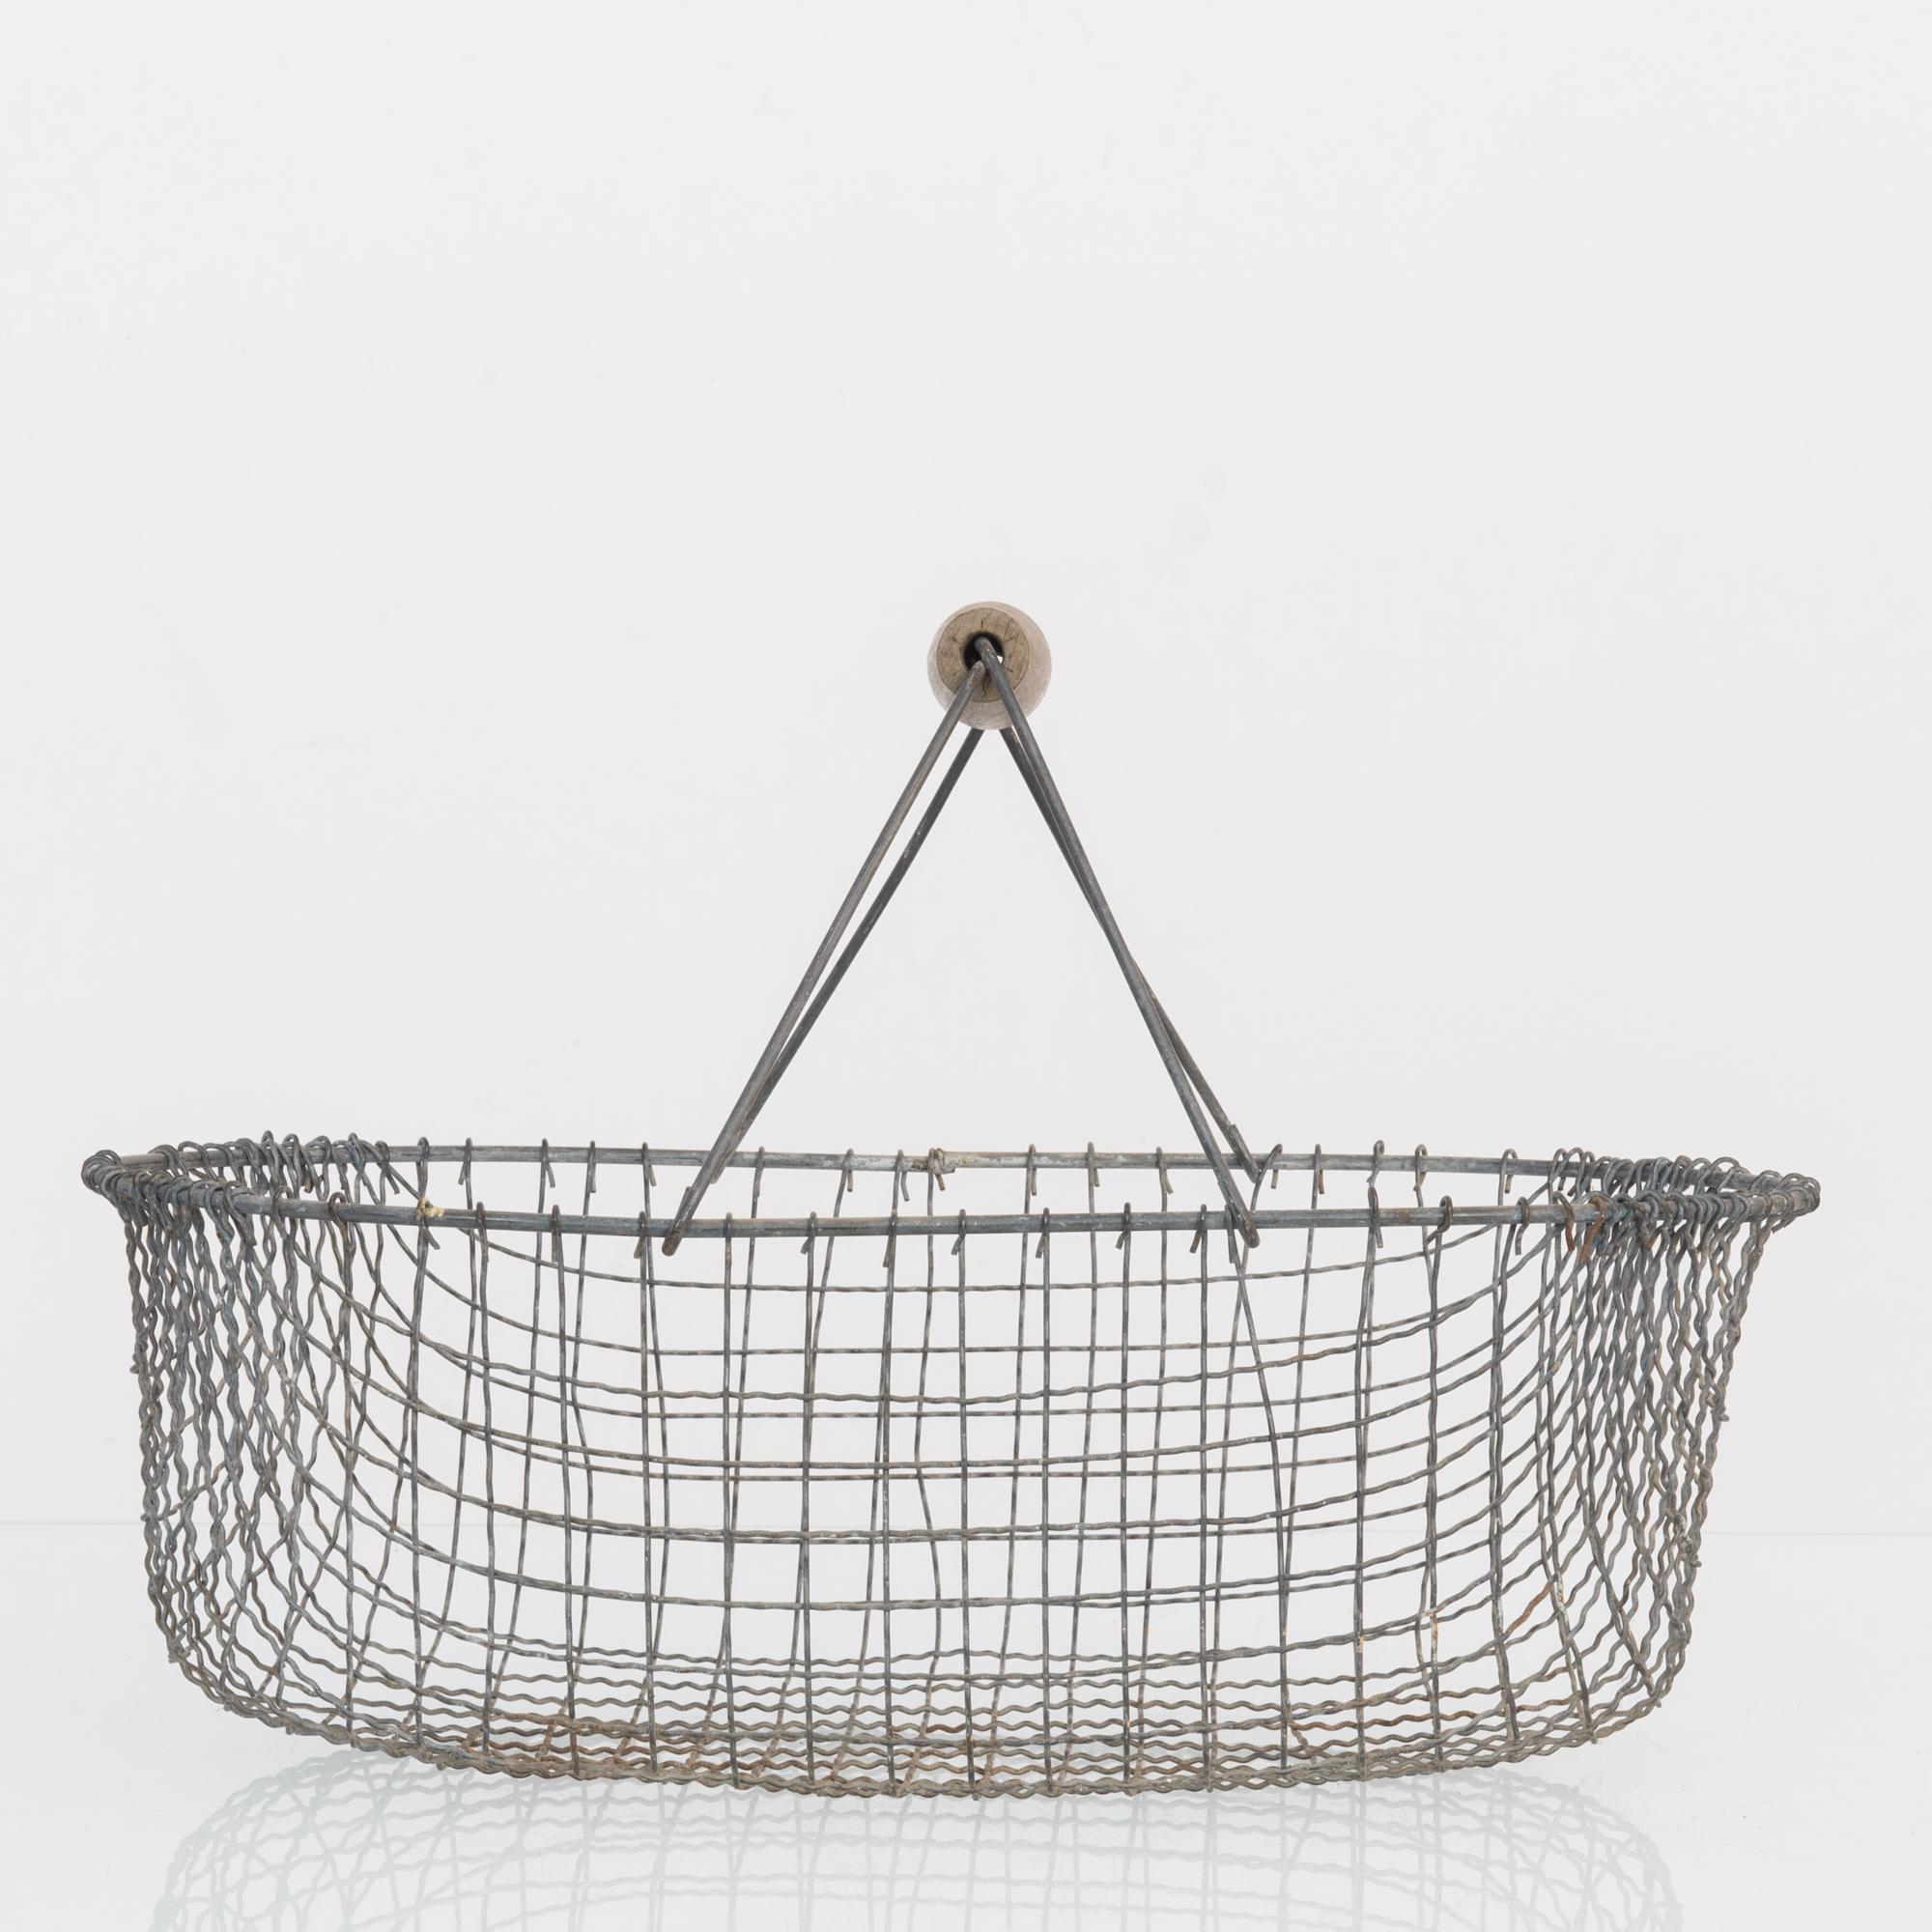 This basket was made in Belgium, circa 1960. Woven from thin metal wires, the basket displays a netted, organic structure with depth and a gentle flare. The pot shape is accentuated with heavy wire straps, clasped with a wooden handle.